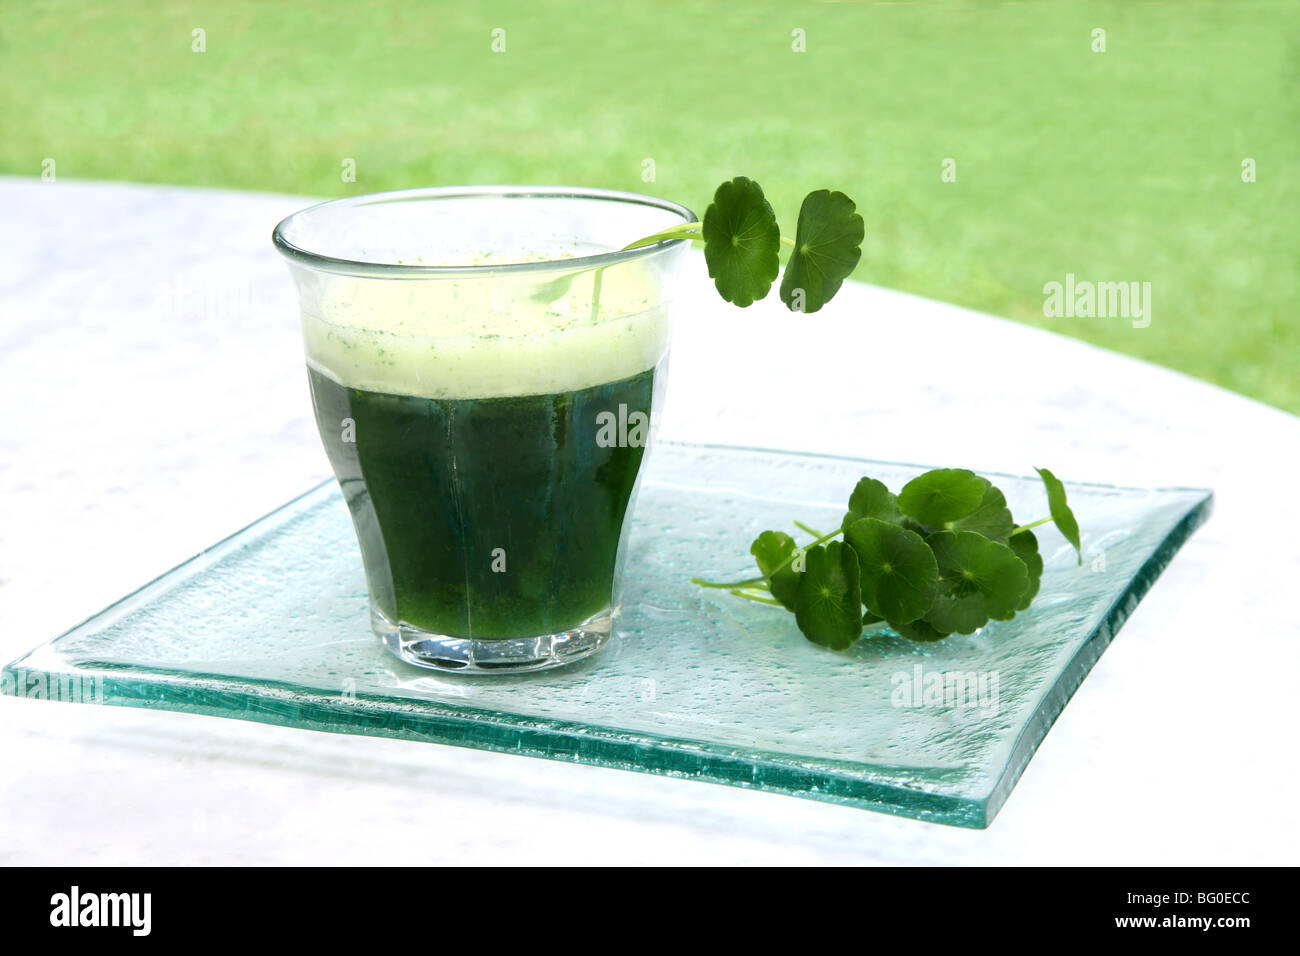 Brahmi leaves (Centella Asiatica) and a drink made from it used for abdominal disorders Stock Photo